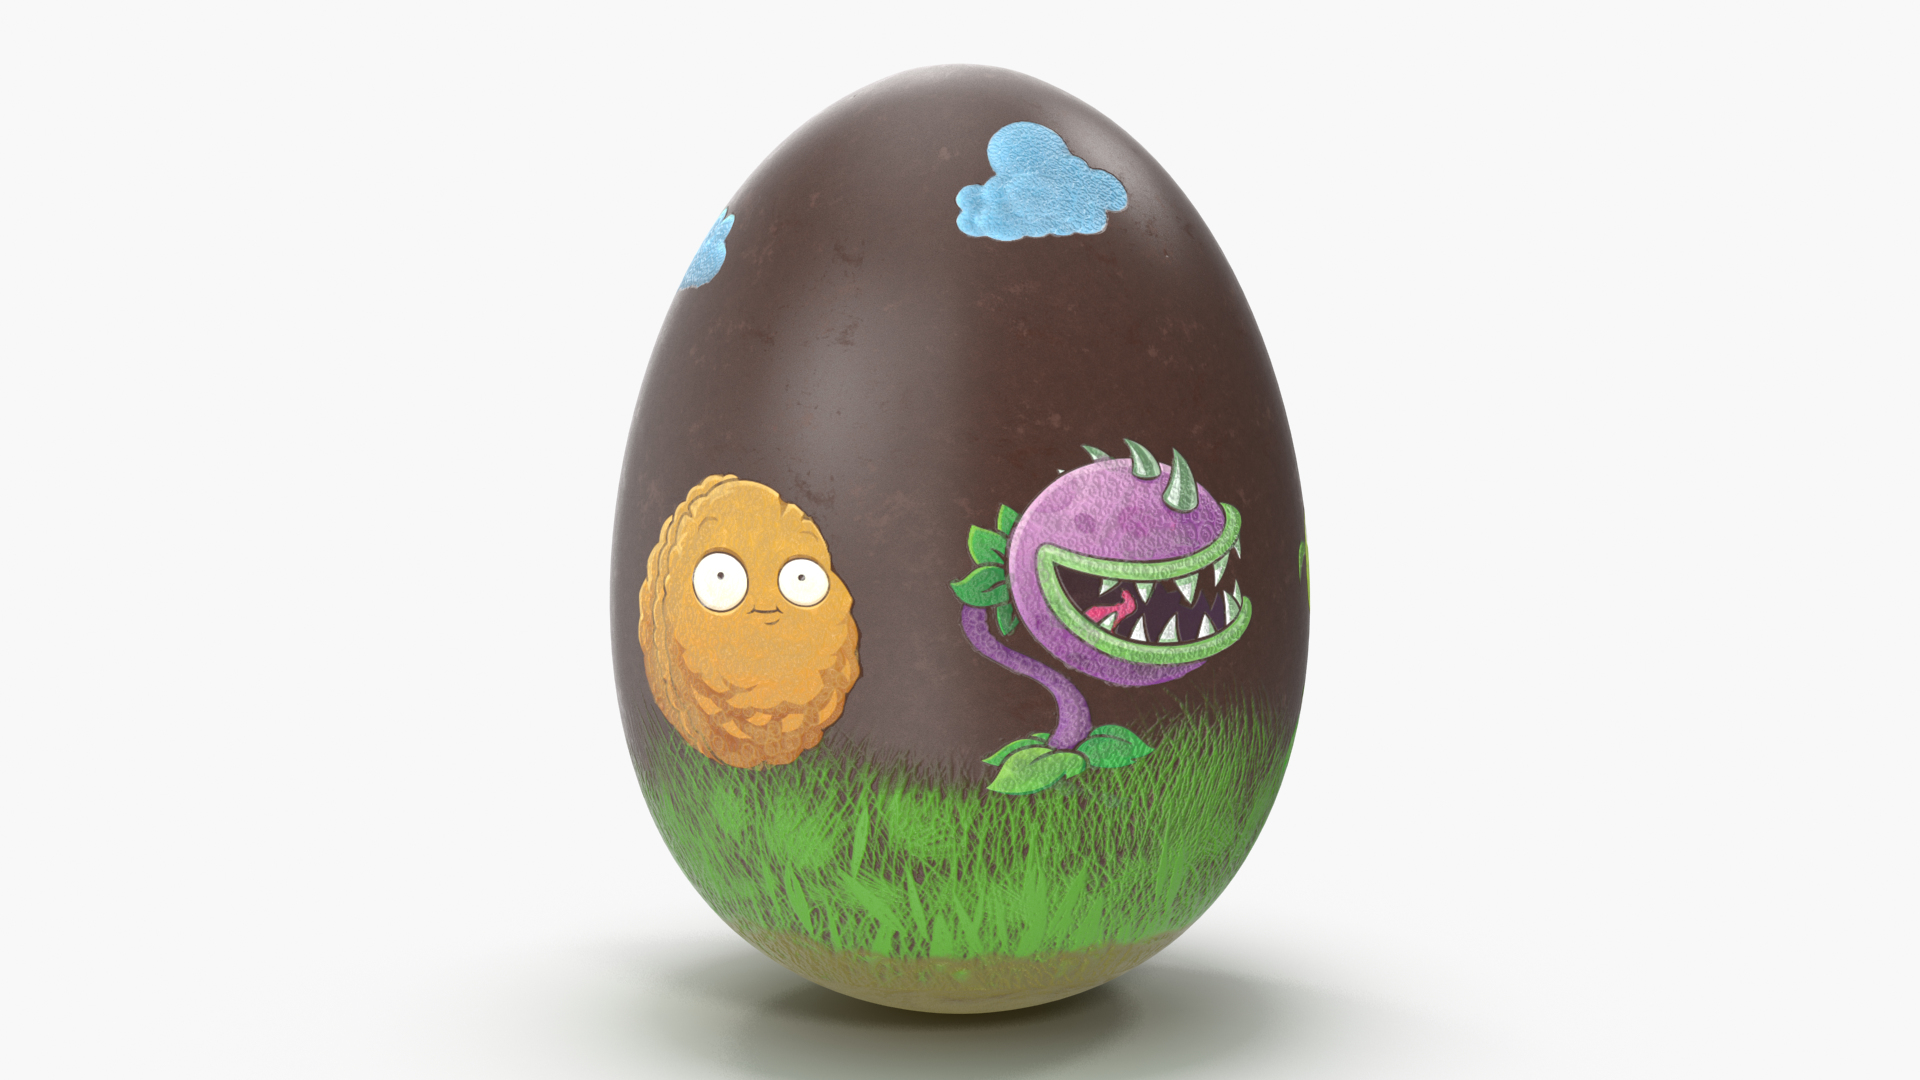 Plants Vs. Zombies' Tips and Easter Eggs